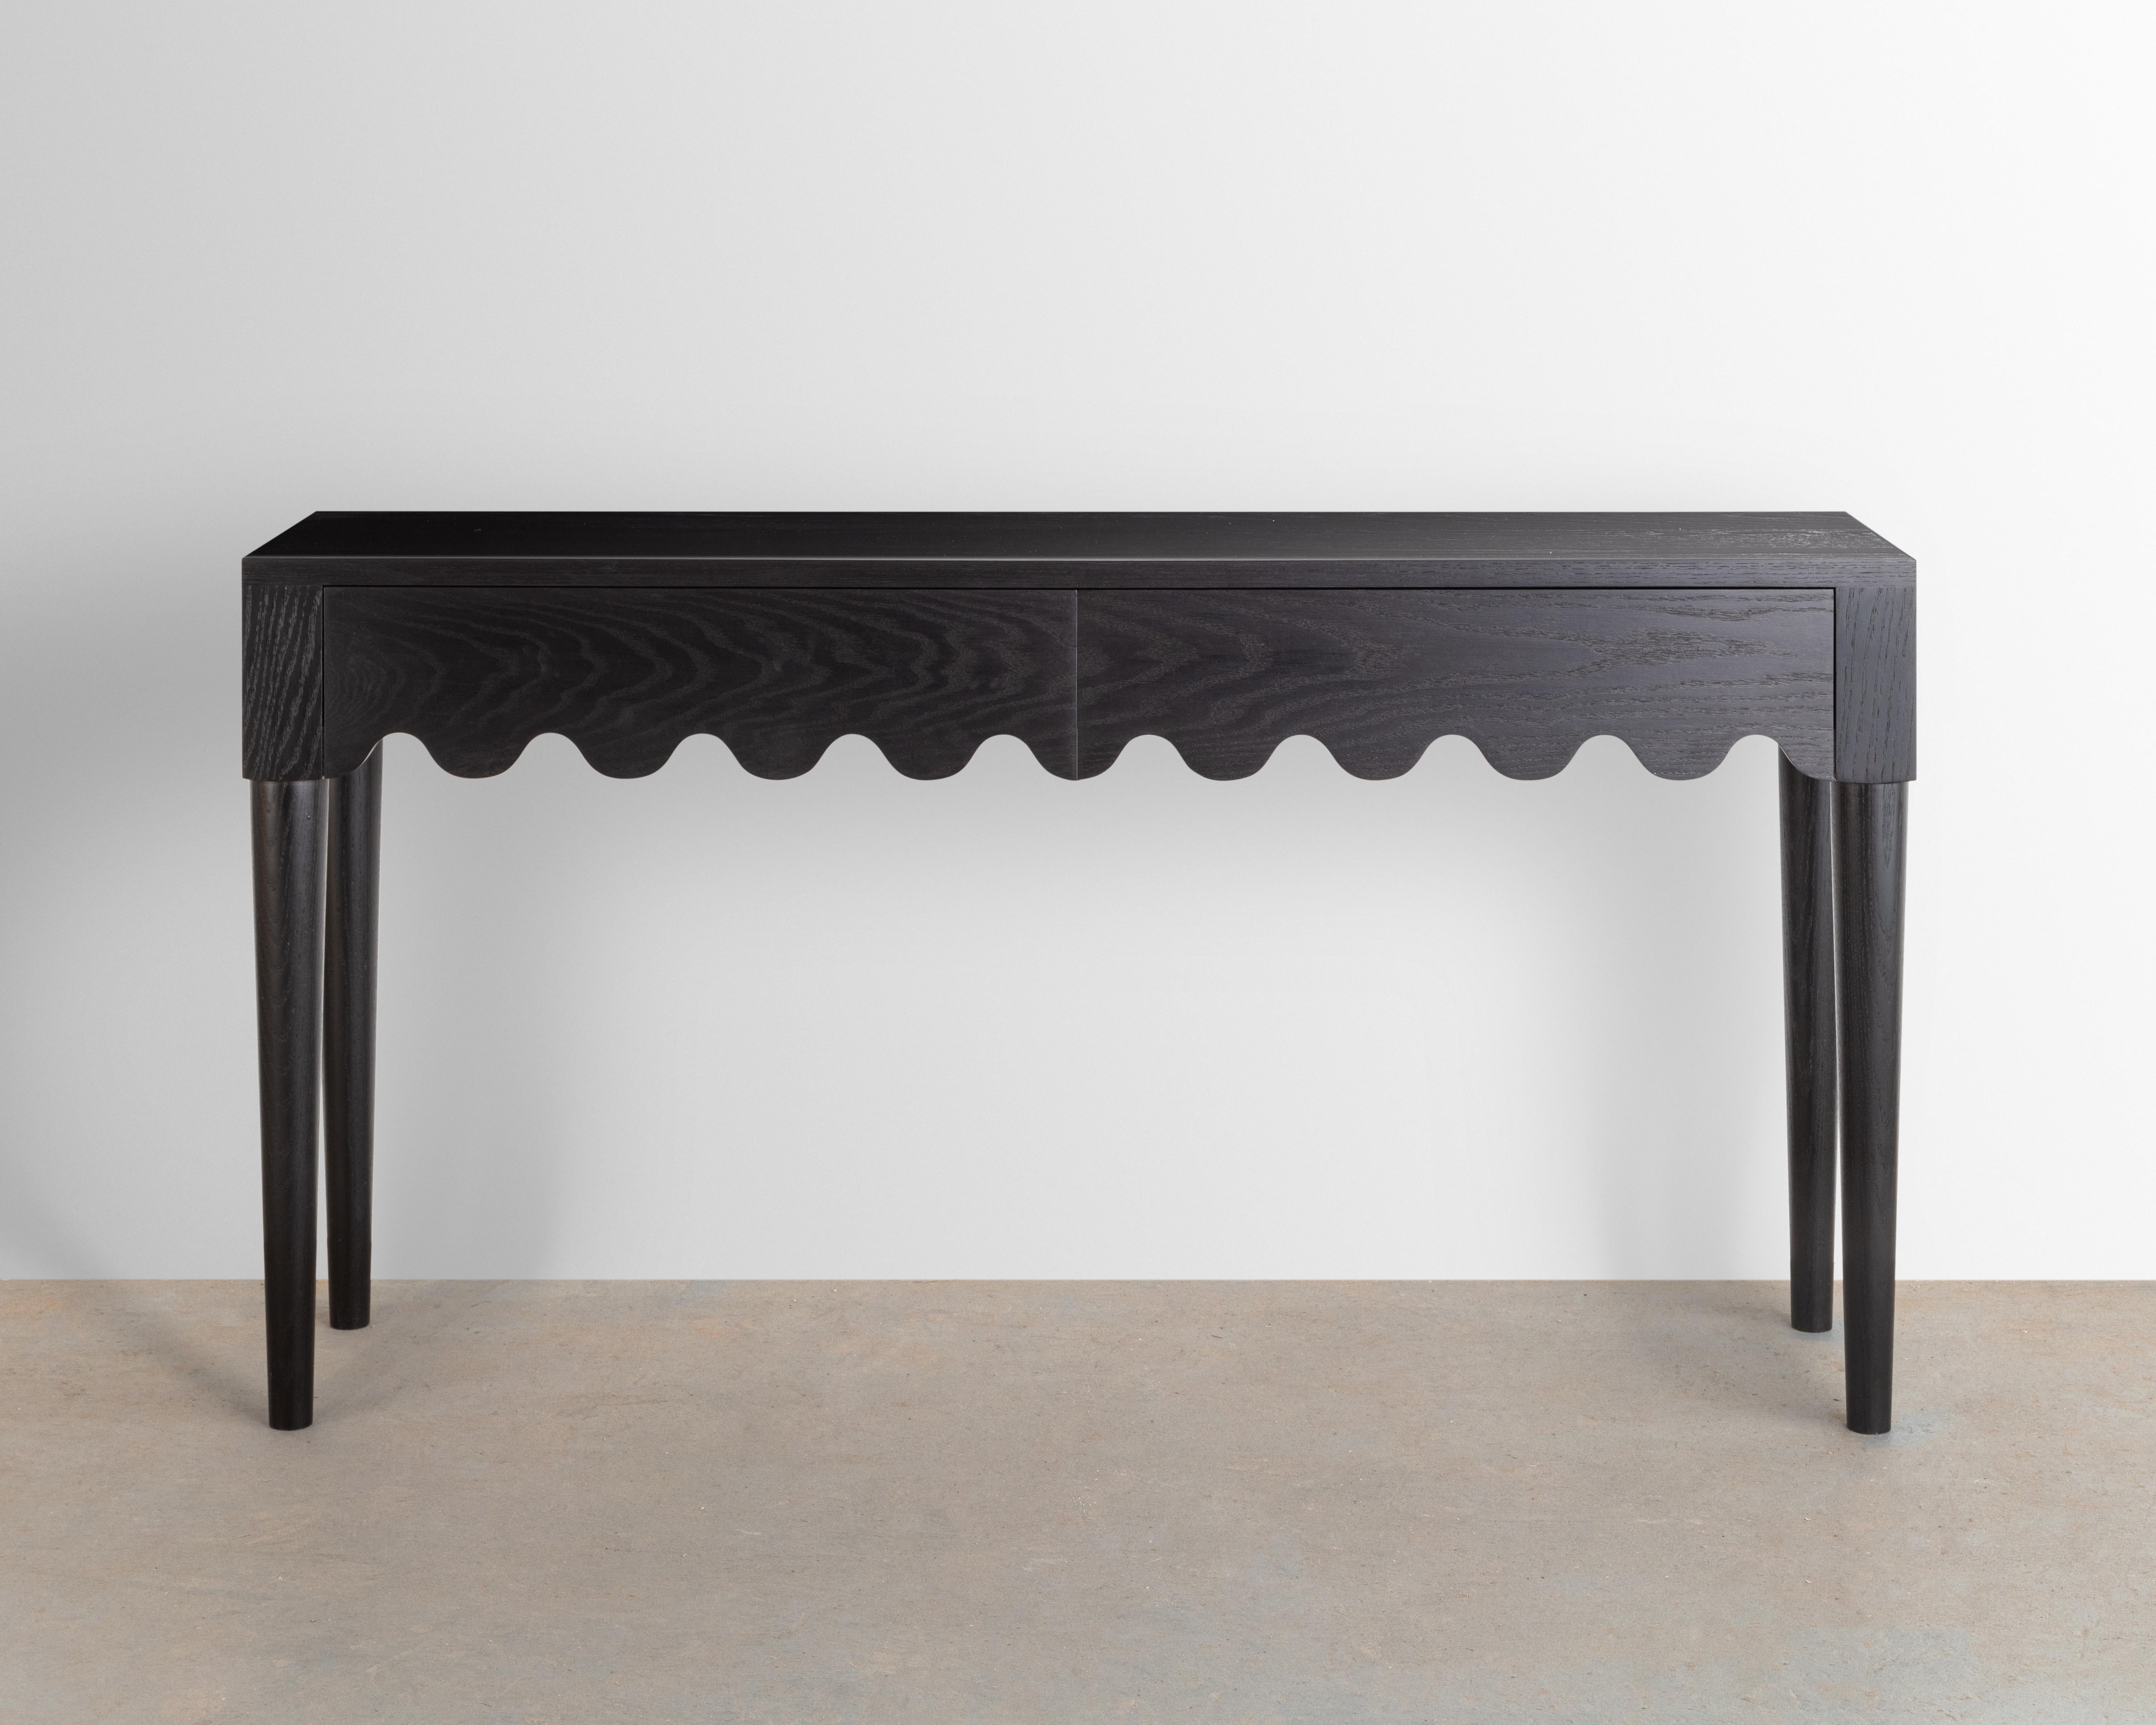 Designed and built in the studio this entryway table features a playful detail that continues along its double drawer faces and seamlessly wraps around its form. 

Made from solid ebonized oak- inspired by the French mid-century designer Jean